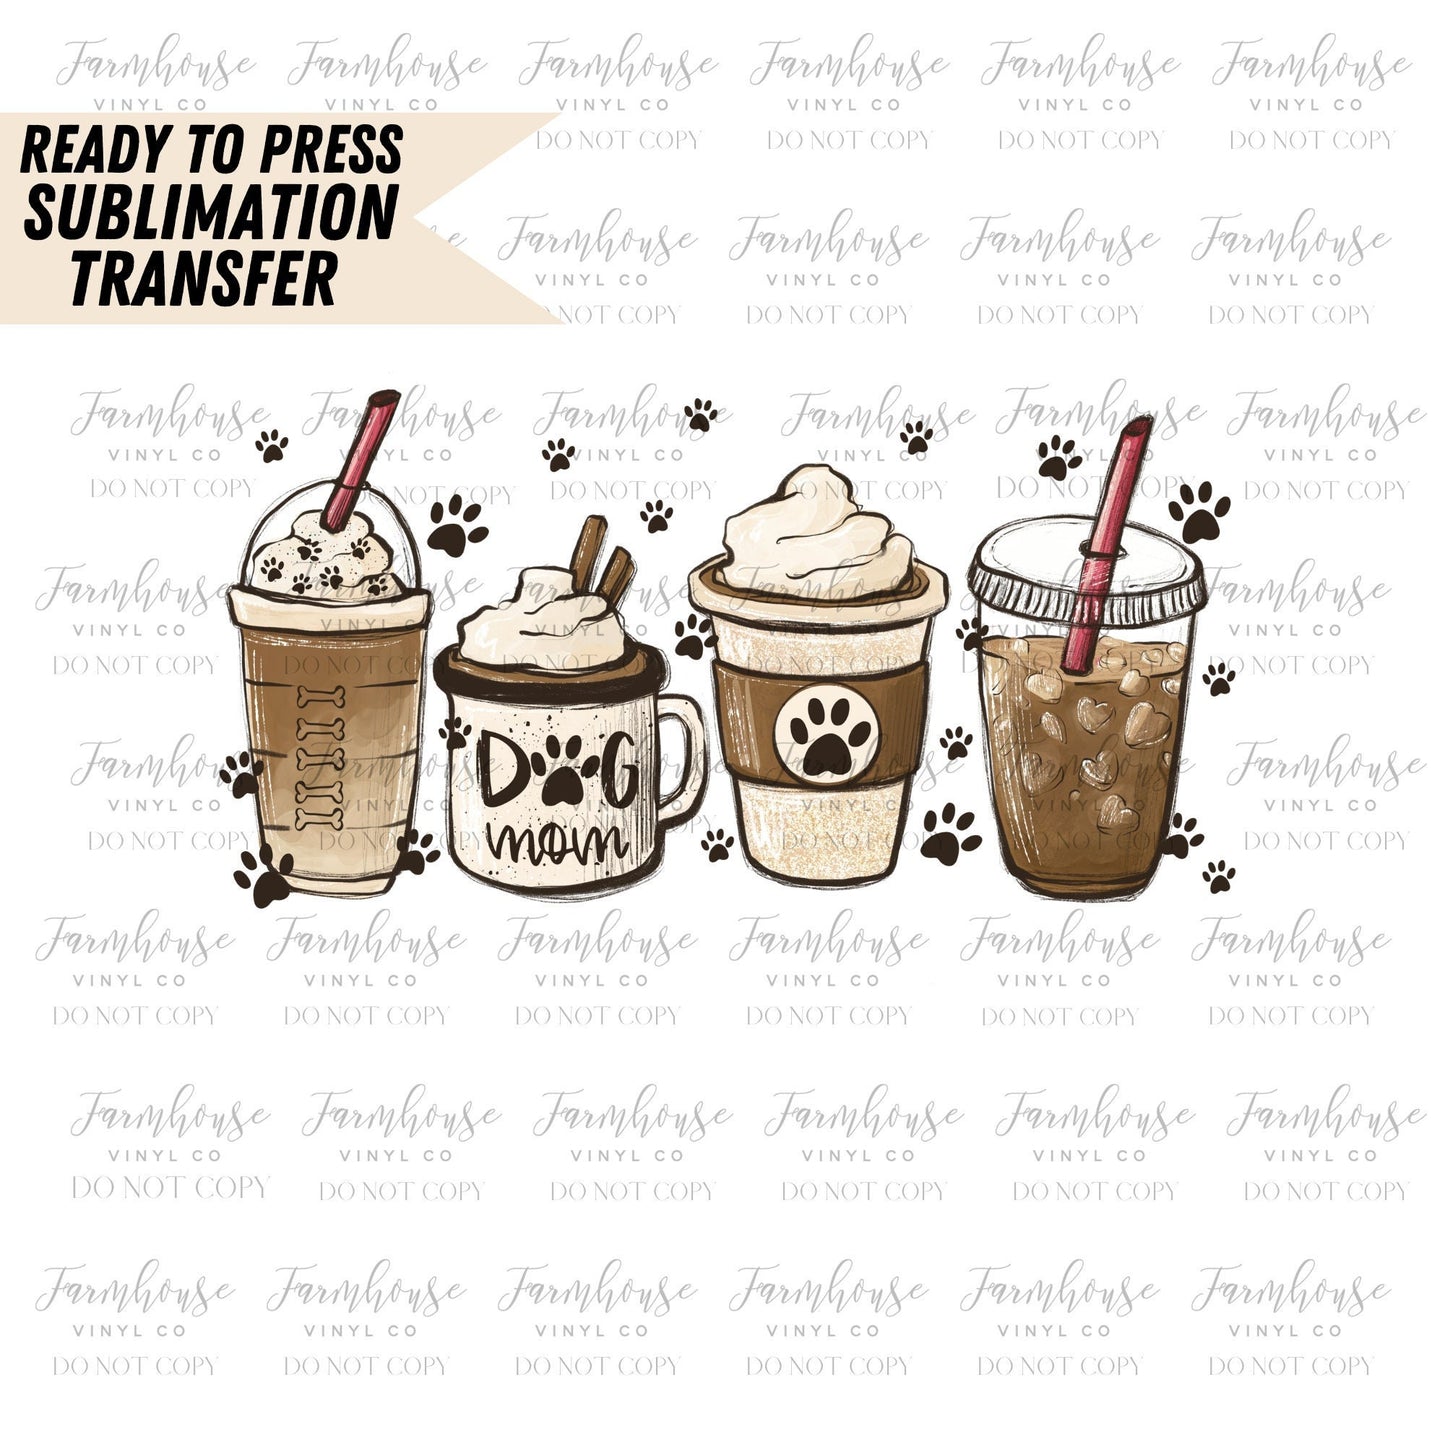 Dog mom coffee lover, latte iced coffee dog mom pet animals paws, Ready to Press Sublimation Transfer, Trending Graphic 22, Coffee